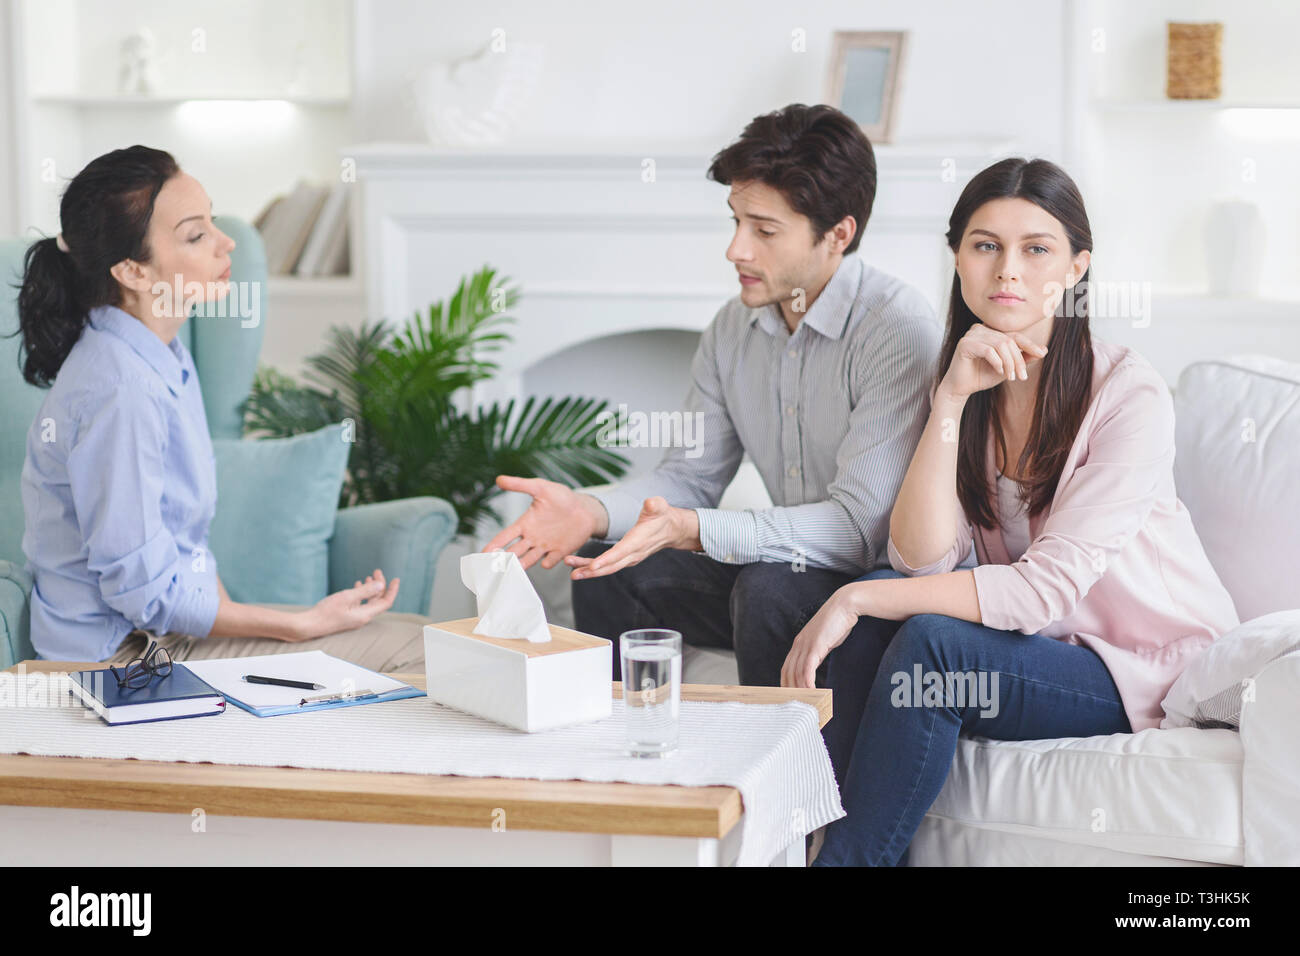 Upset man talking to psychiatrist during couple counseling session Stock Photo